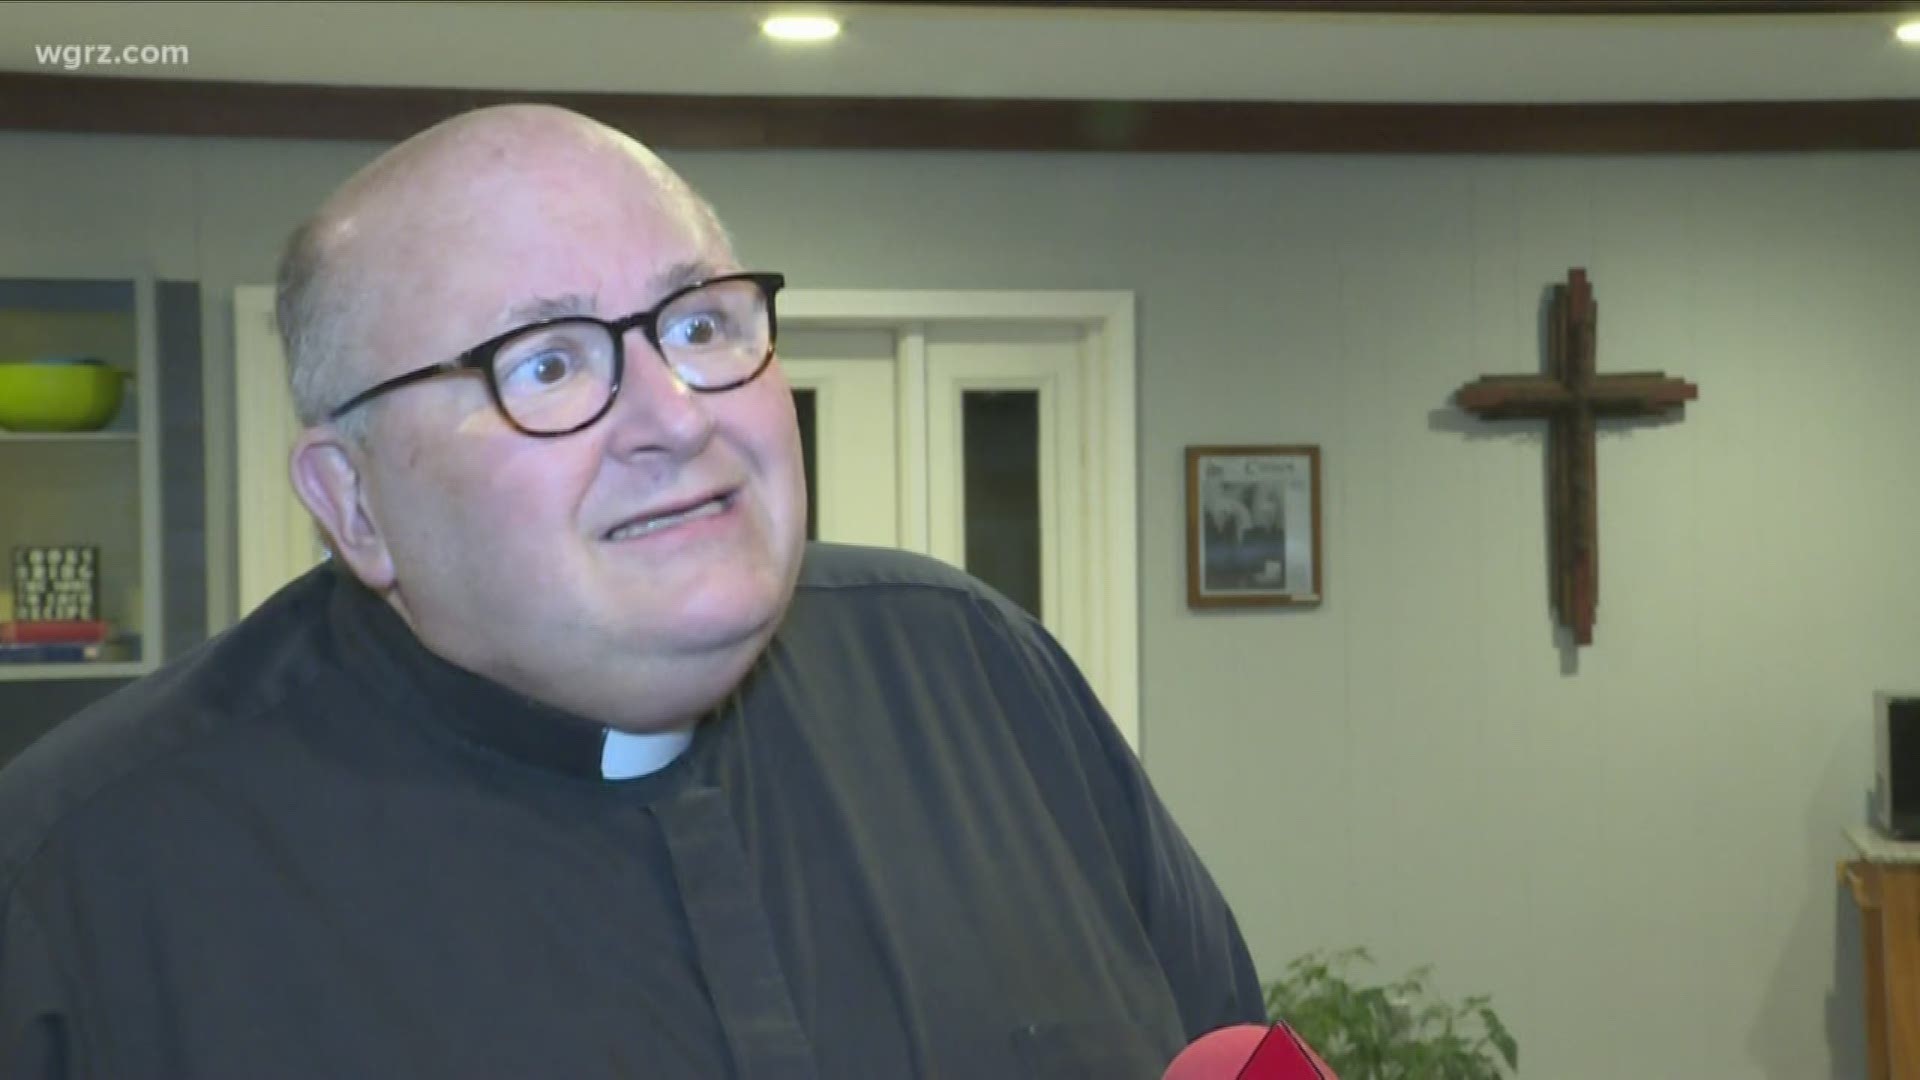 A local priest and deacon spoke with us about the church's future.